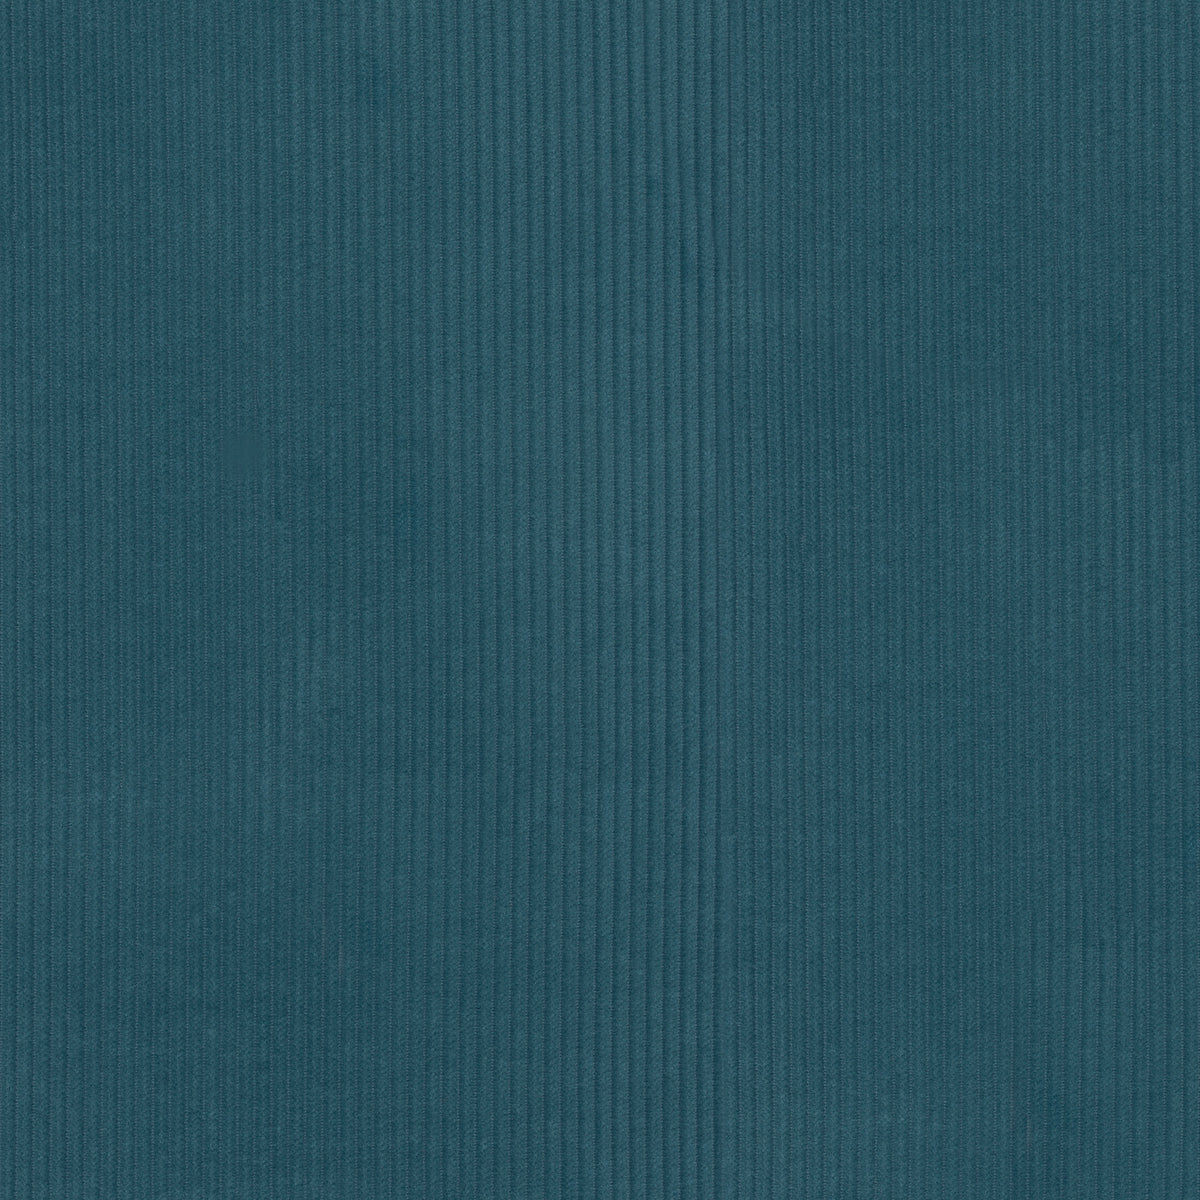 P/K Lifestyles Wales - Delft 412025 Fabric Swatch